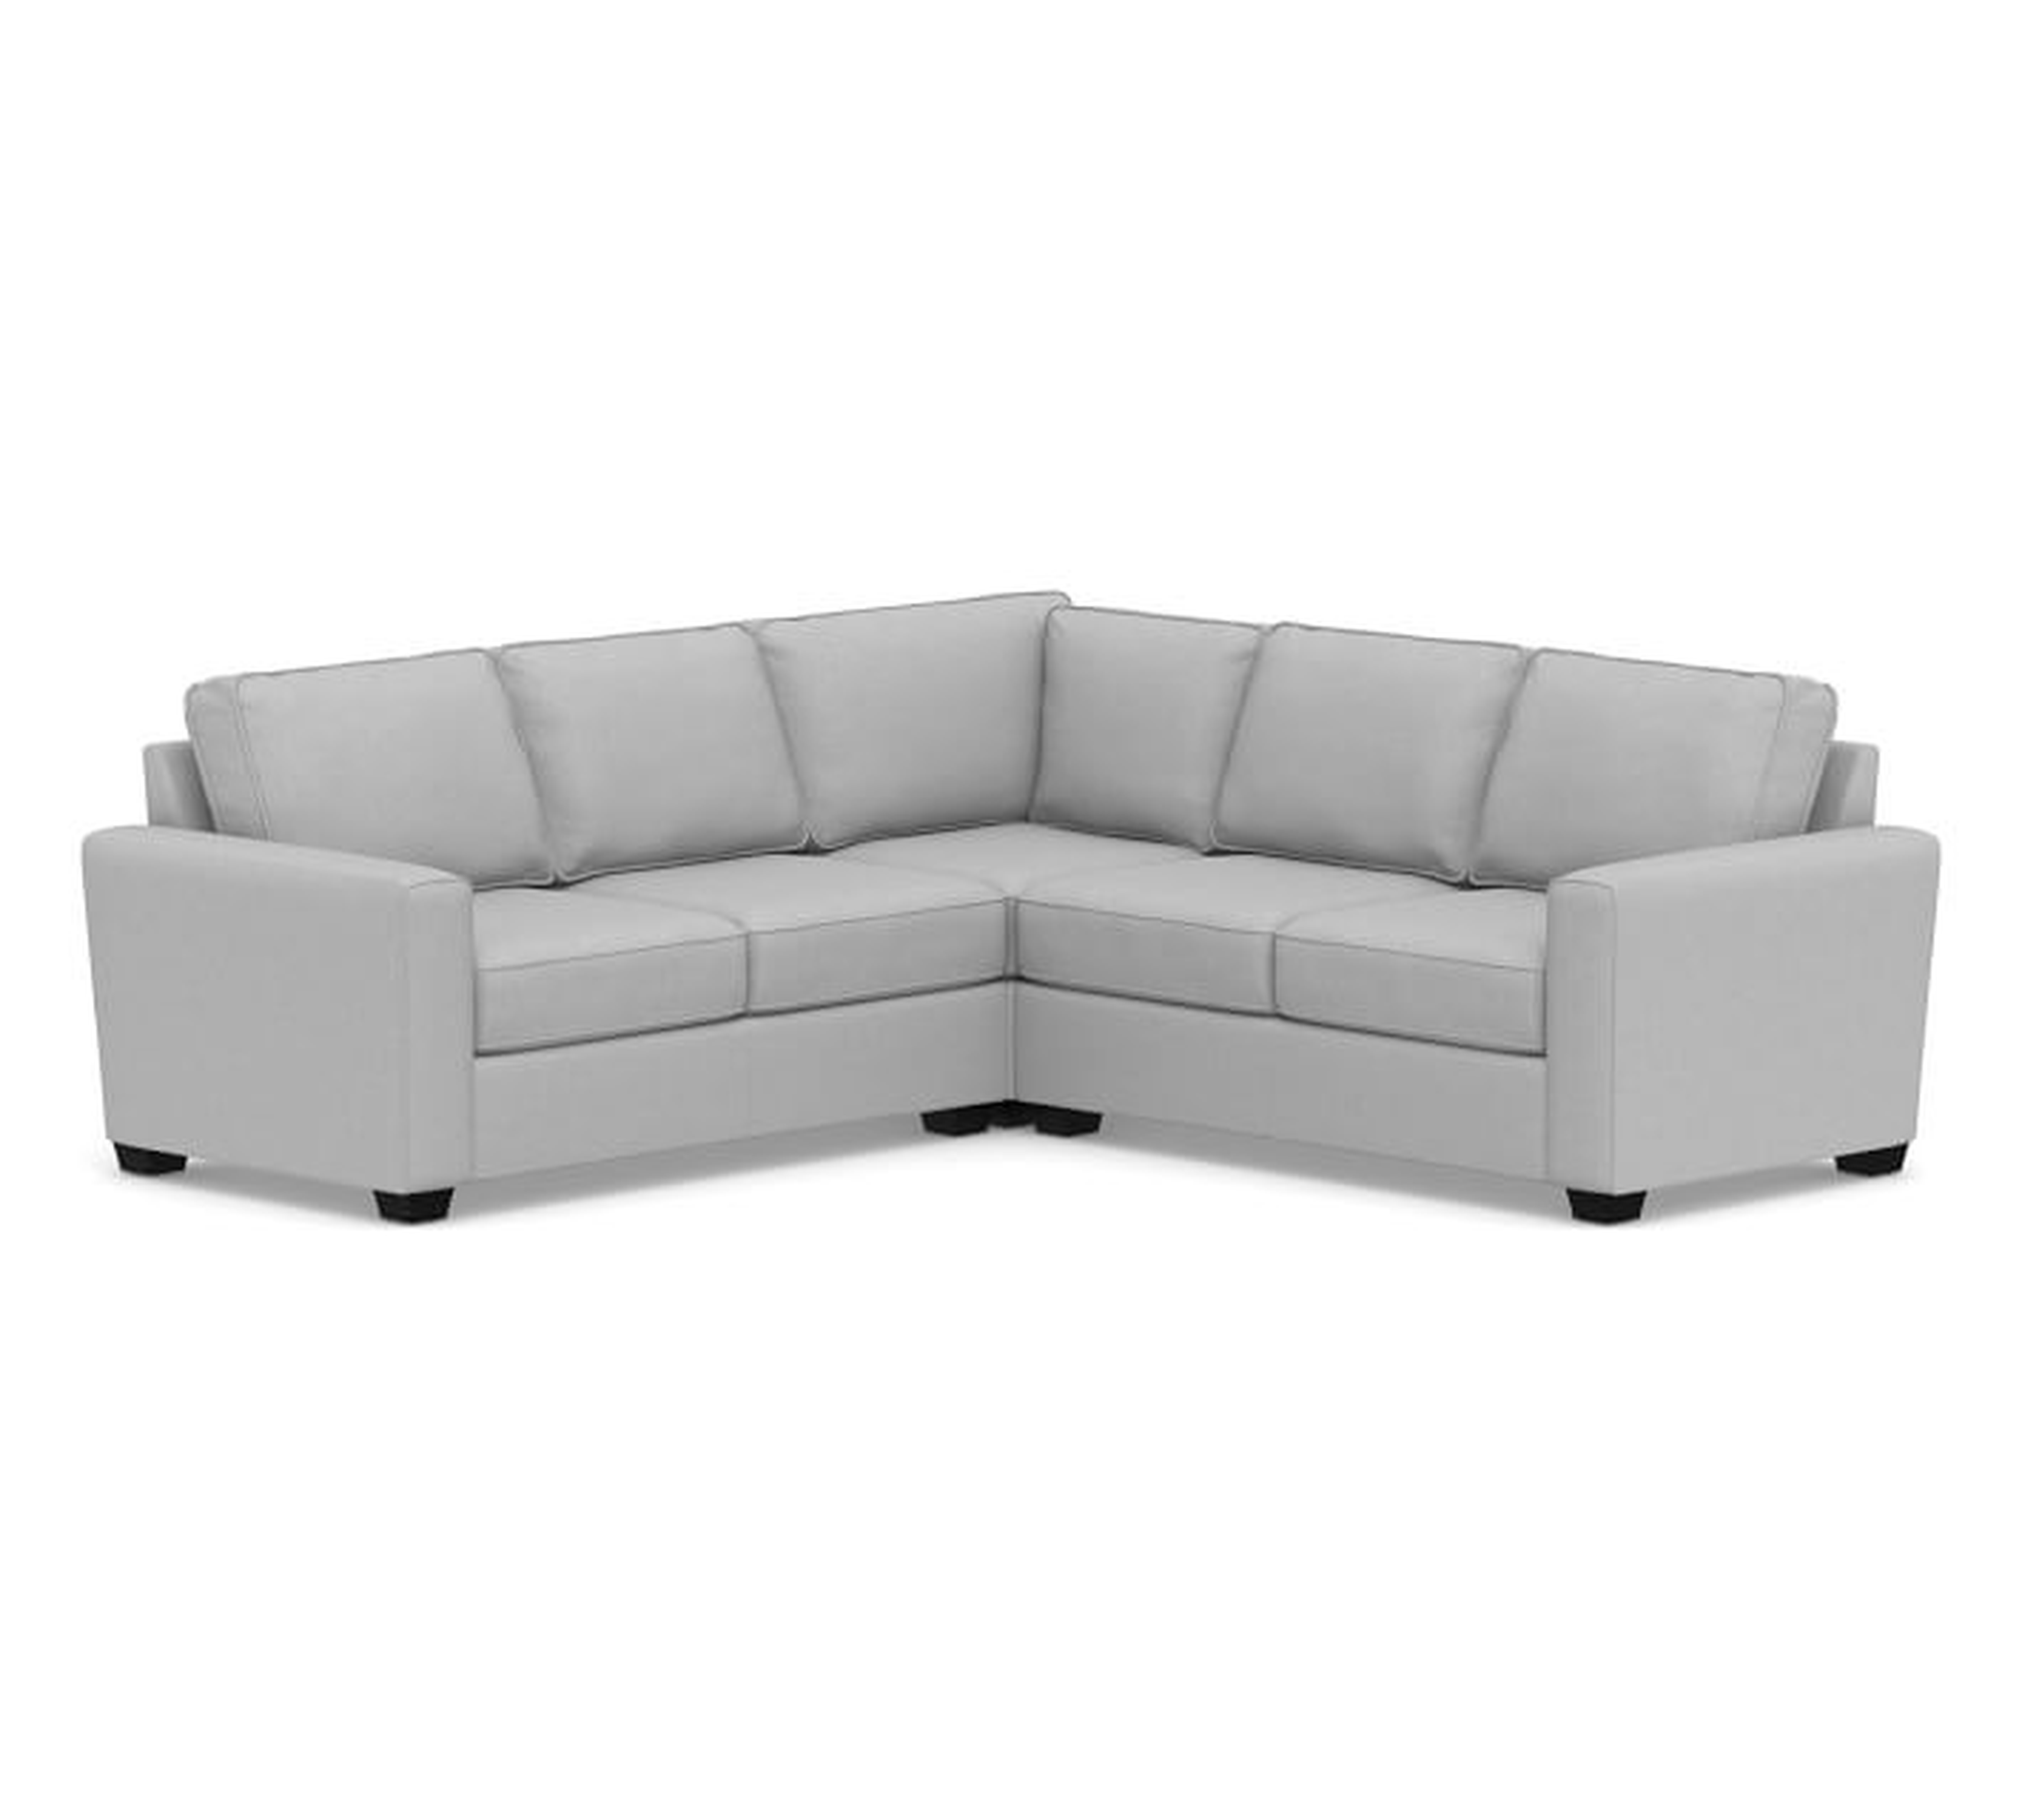 SoMa Fremont Square Arm Upholstered 3-Piece L-Shaped Corner Sectional, Polyester Wrapped Cushions, Brushed Crossweave Light Gray - Pottery Barn